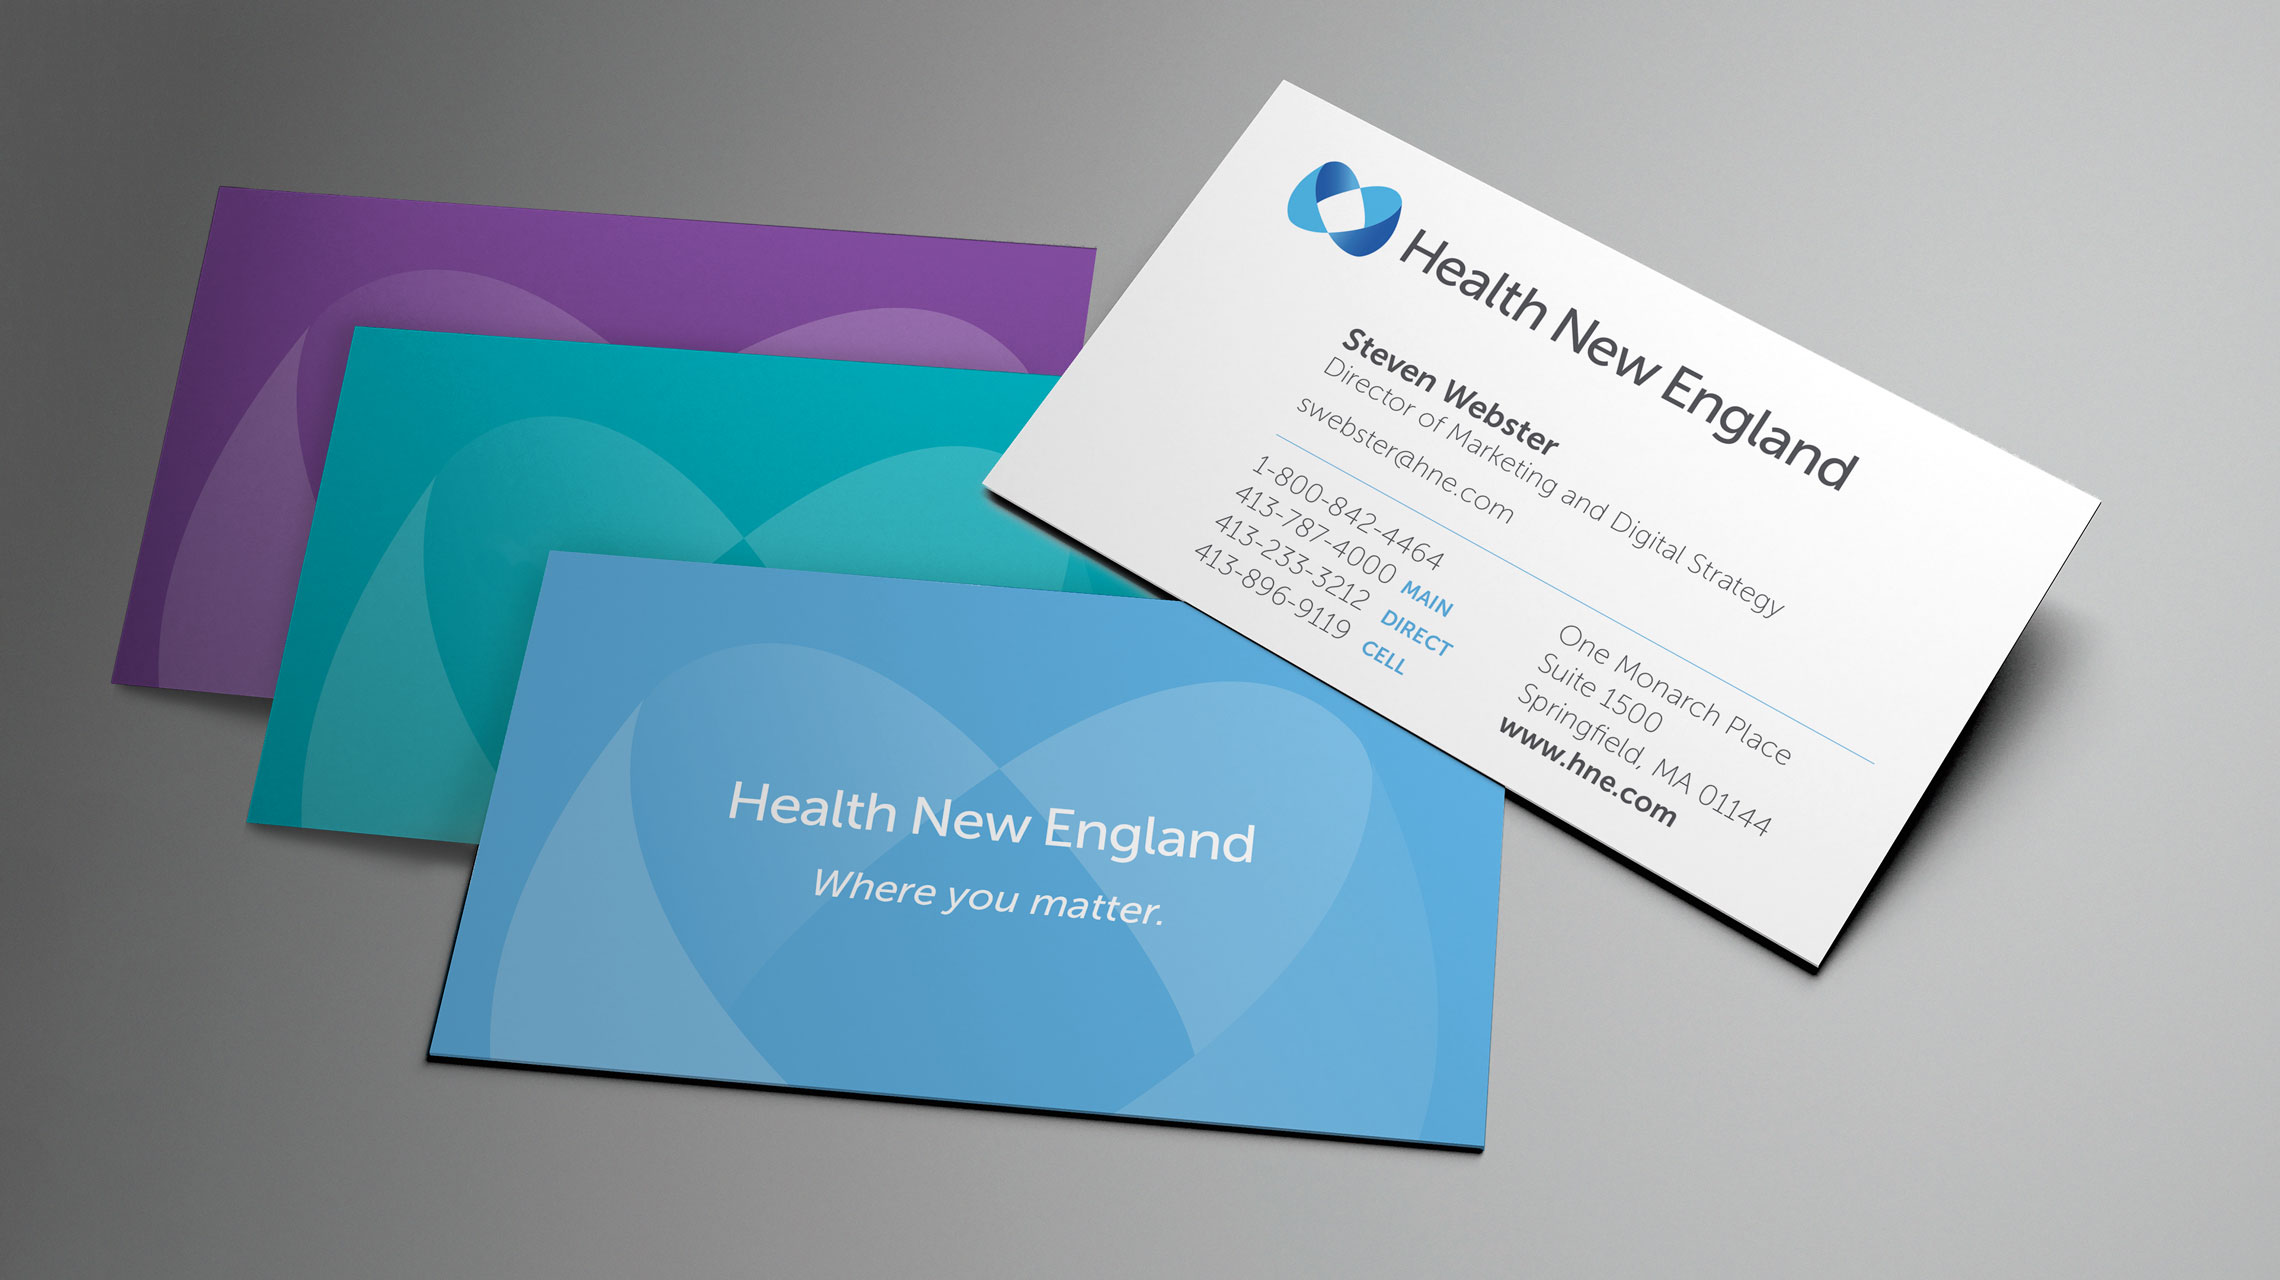 Health New England business cards in blue, teal, purple